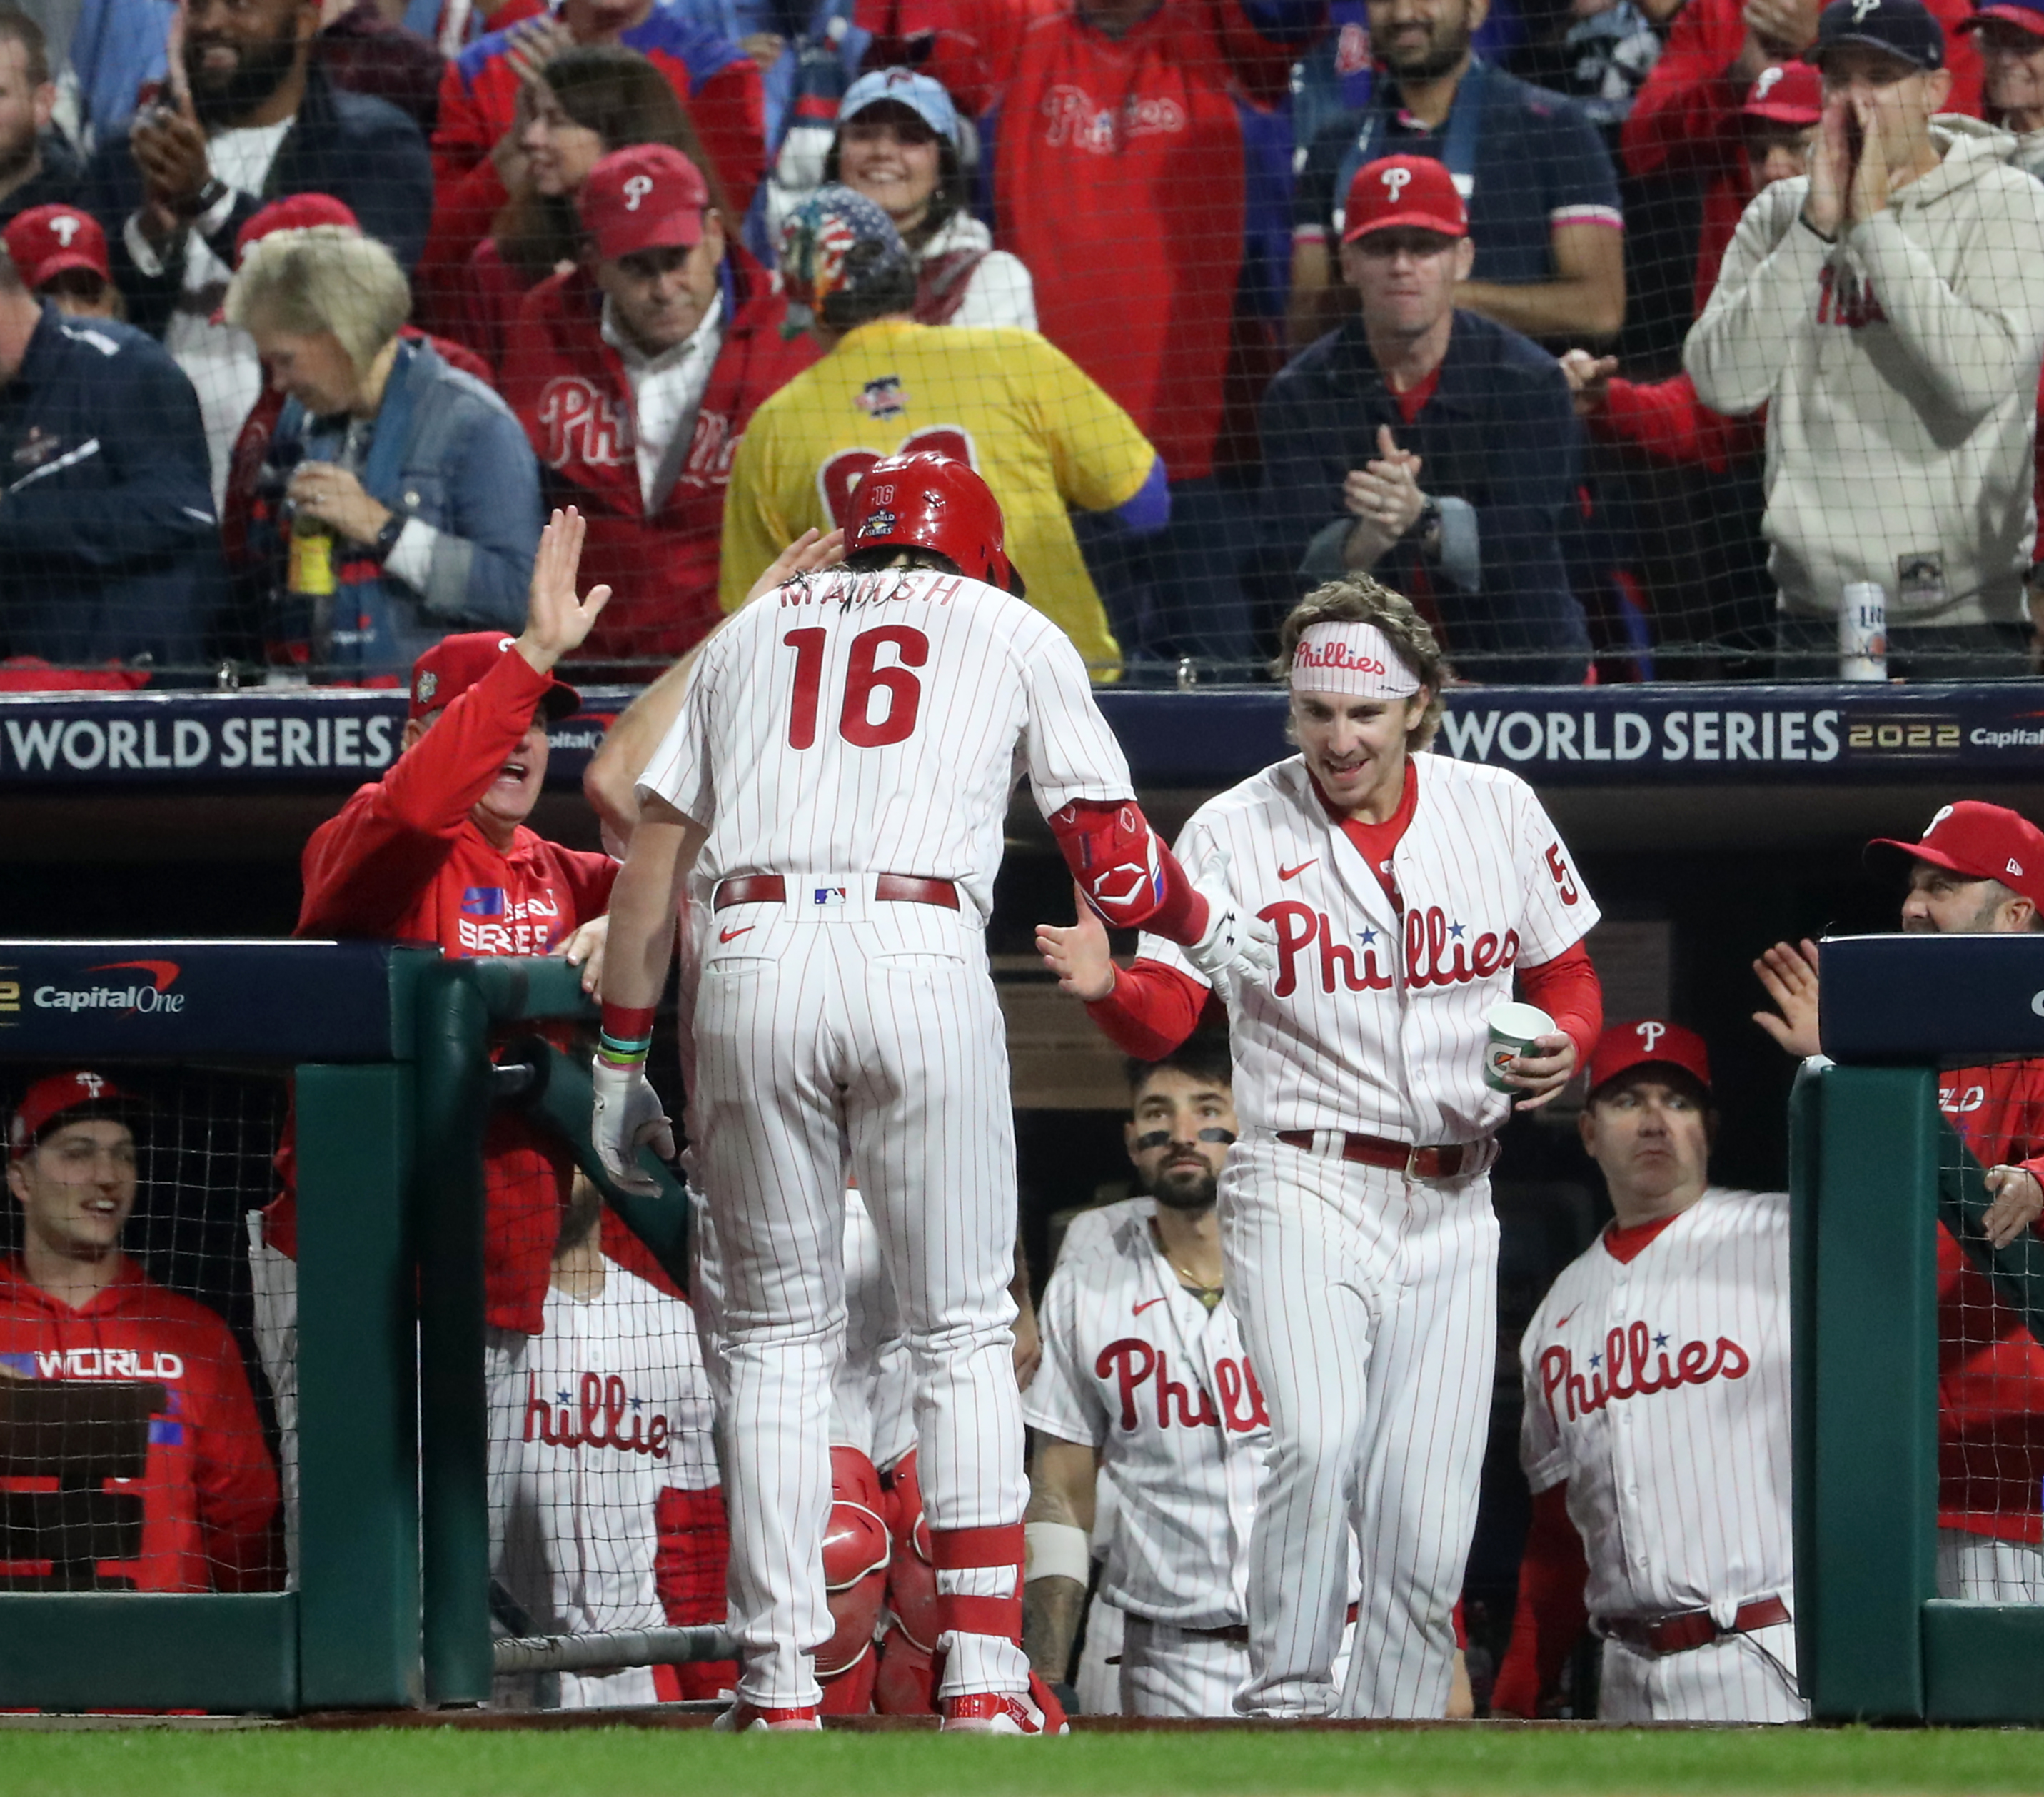 Brandon Marsh (16) of the Philadelphia Phillies celebrates his home run with Bryson Stott (5) in the second inning during World Series Game 3 against the Houston Astros at Citizens Bank Park, Tuesday, Nov. 1, 2022. The home run gave the Phillies a 4-0 lead.